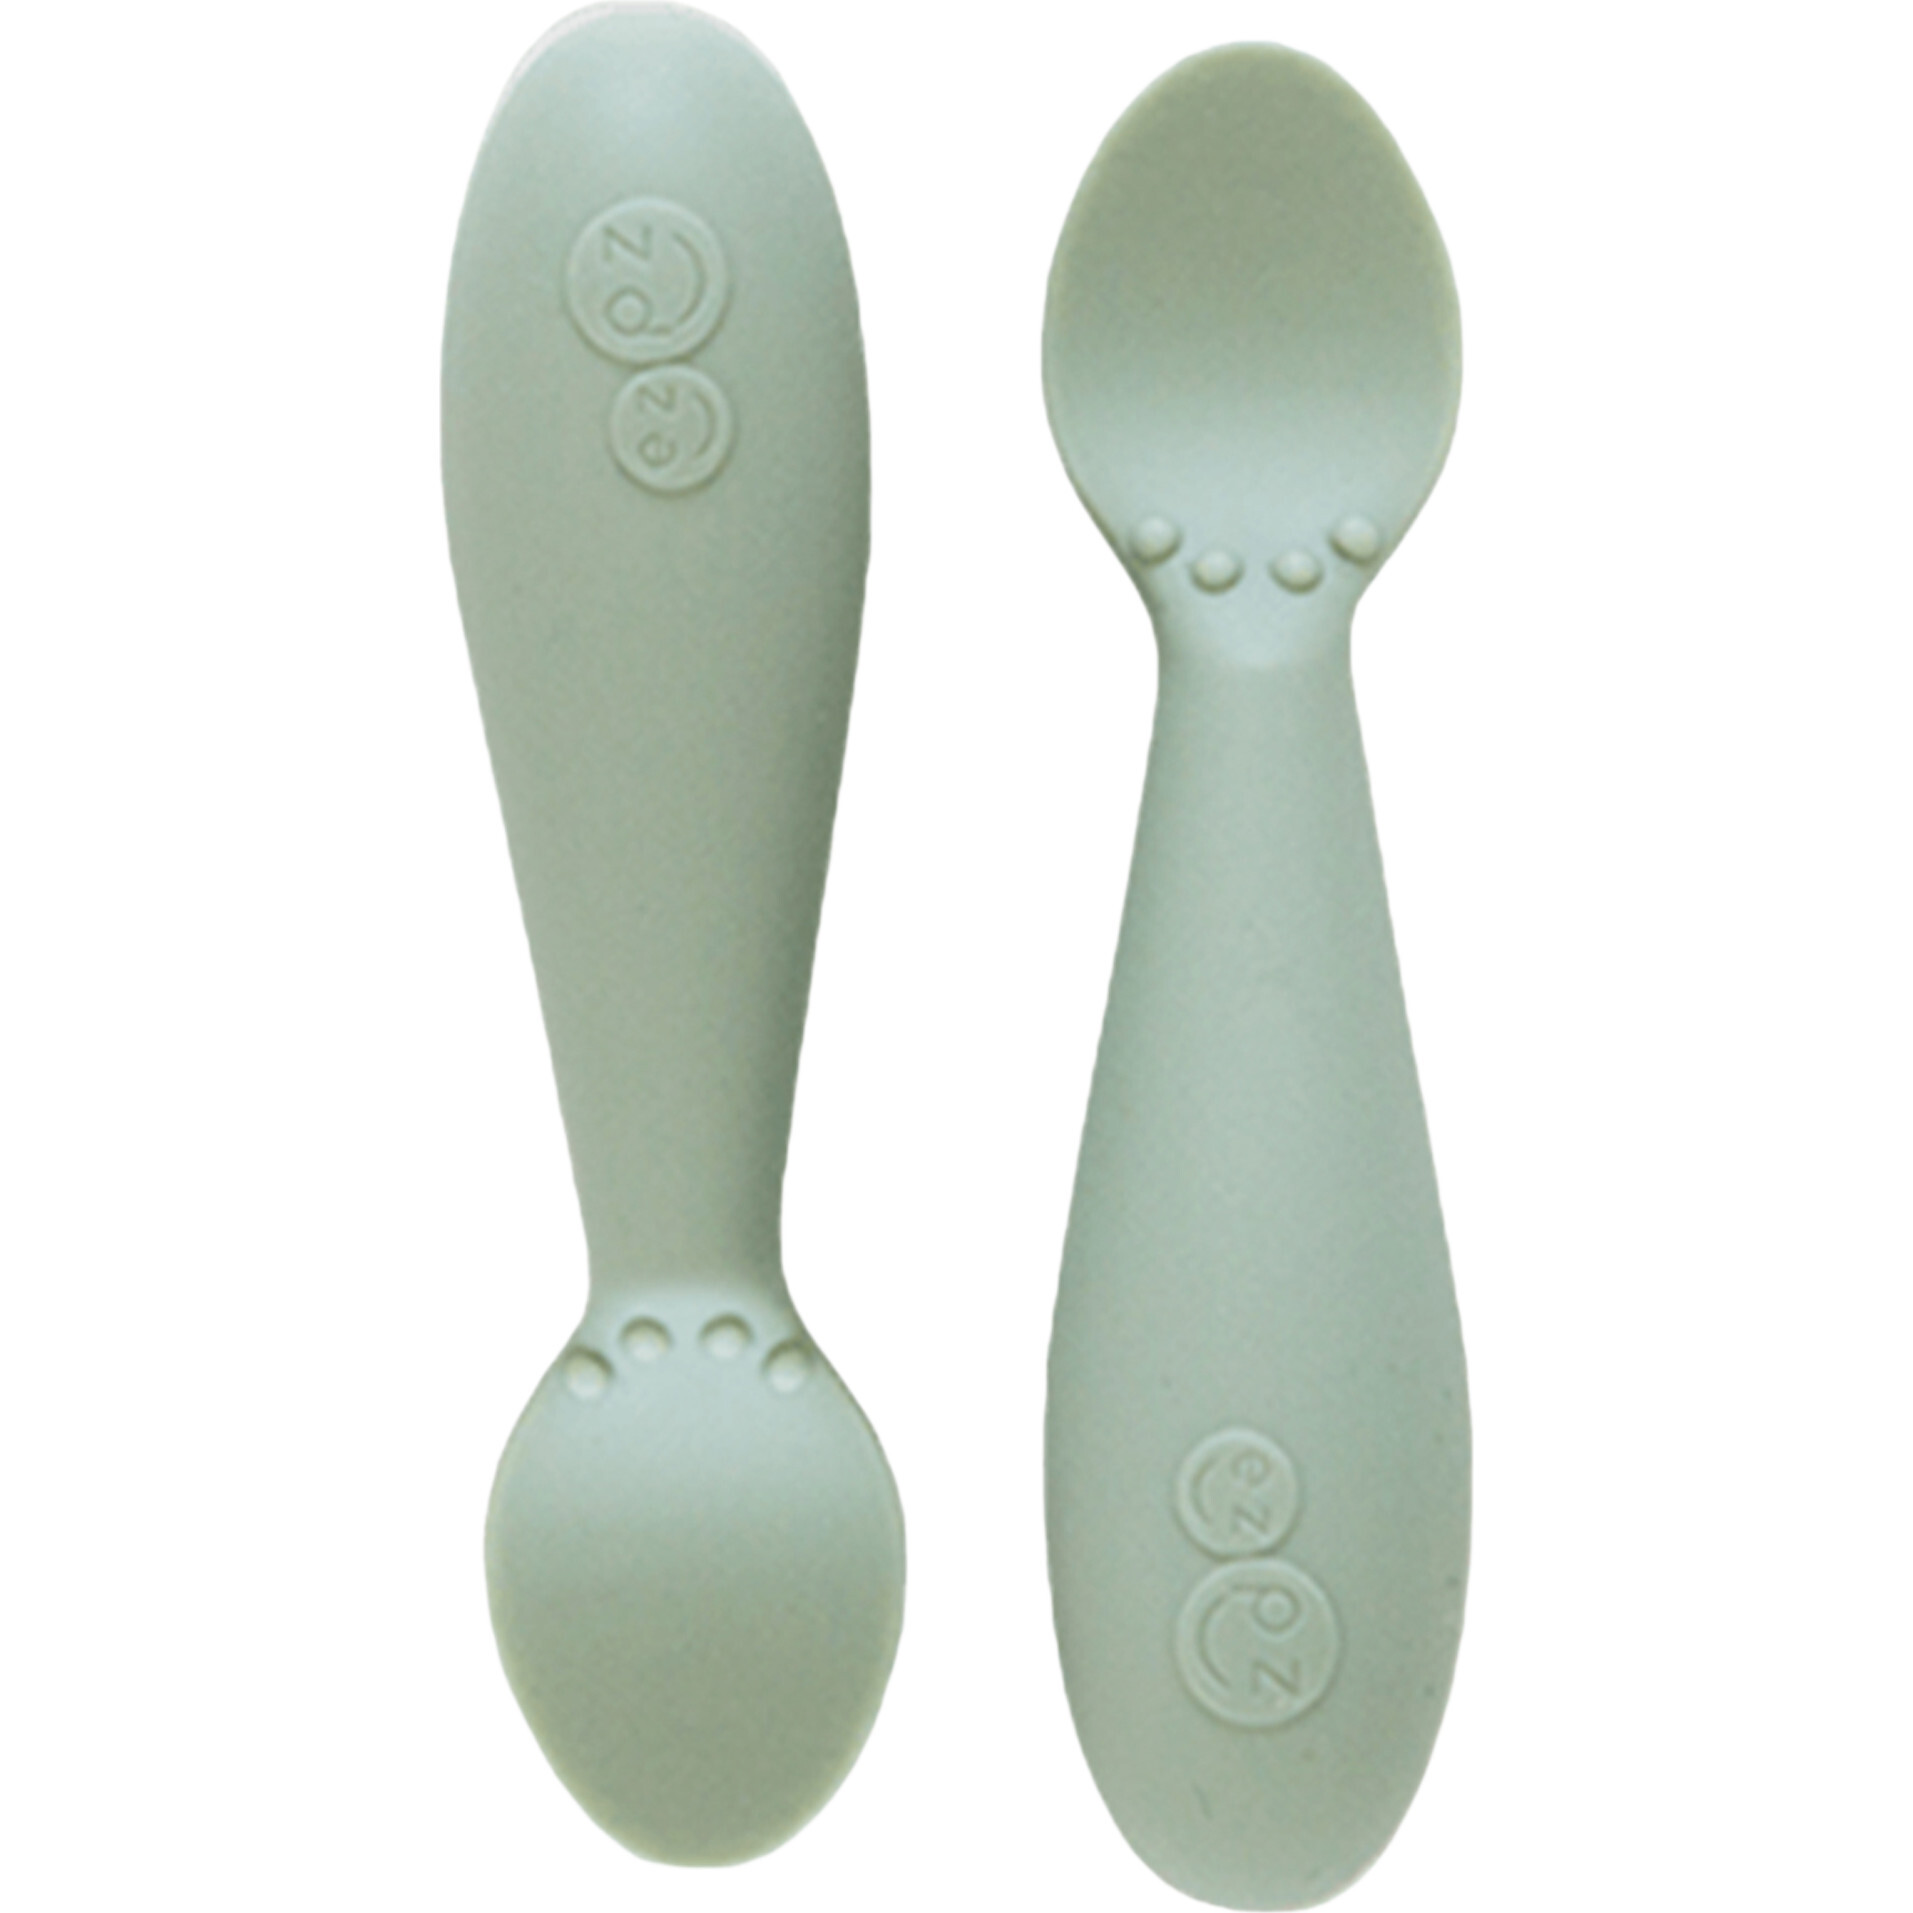 ezpz Tiny Spoon (2 Pack in Gray) - 100% Silicone Spoons for Baby Led  Weaning + Purees - Designed by a Pediatric Feeding Specialist - 6 Months+